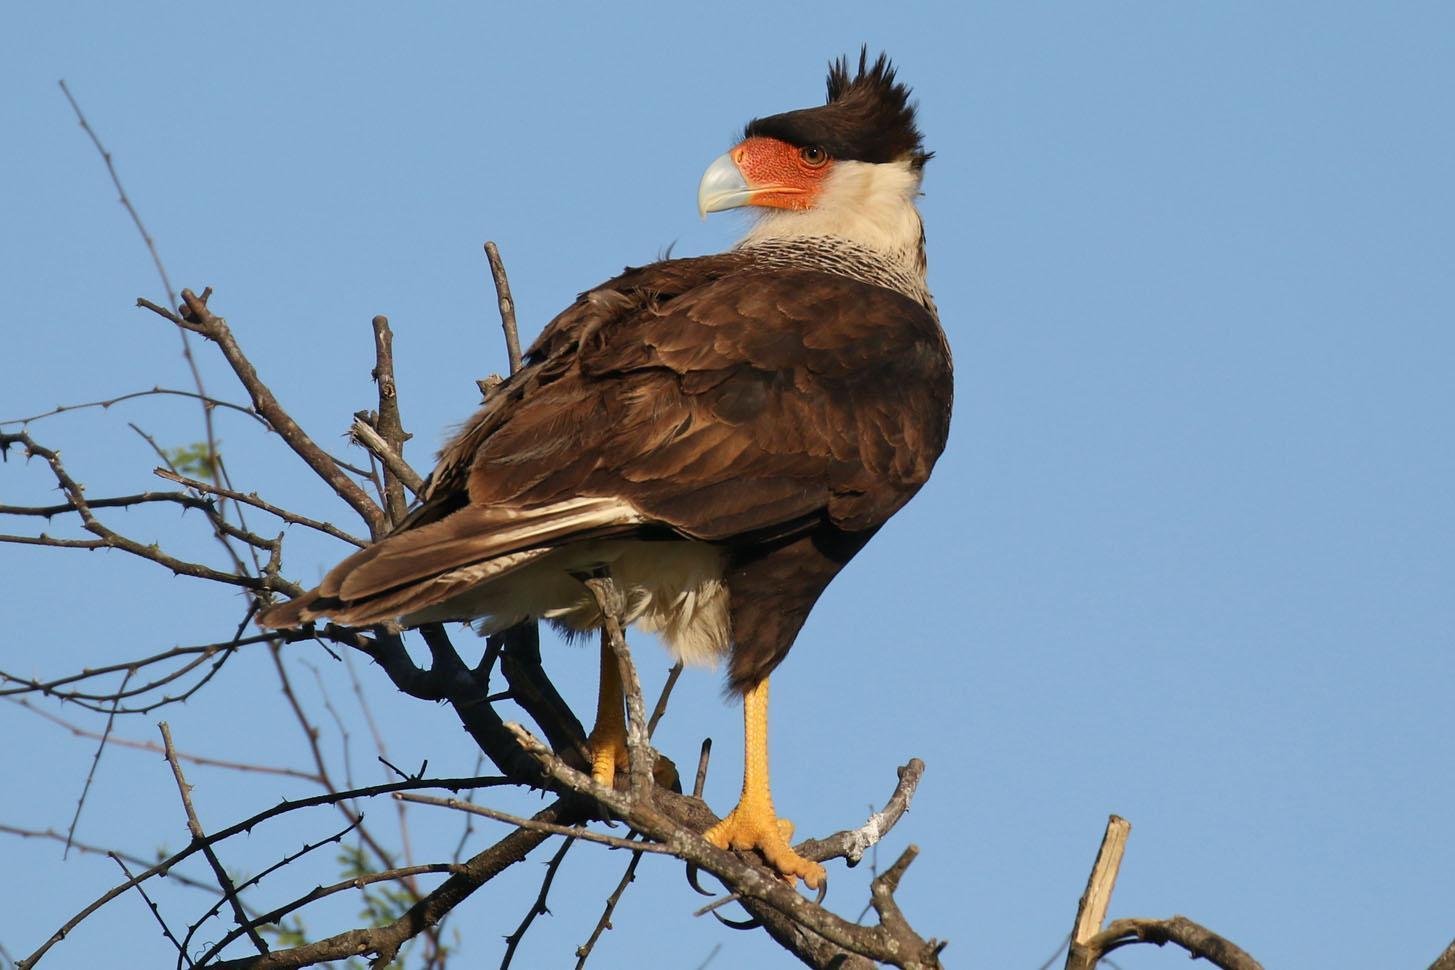 Crested Caracara Photo by Kristy Baker